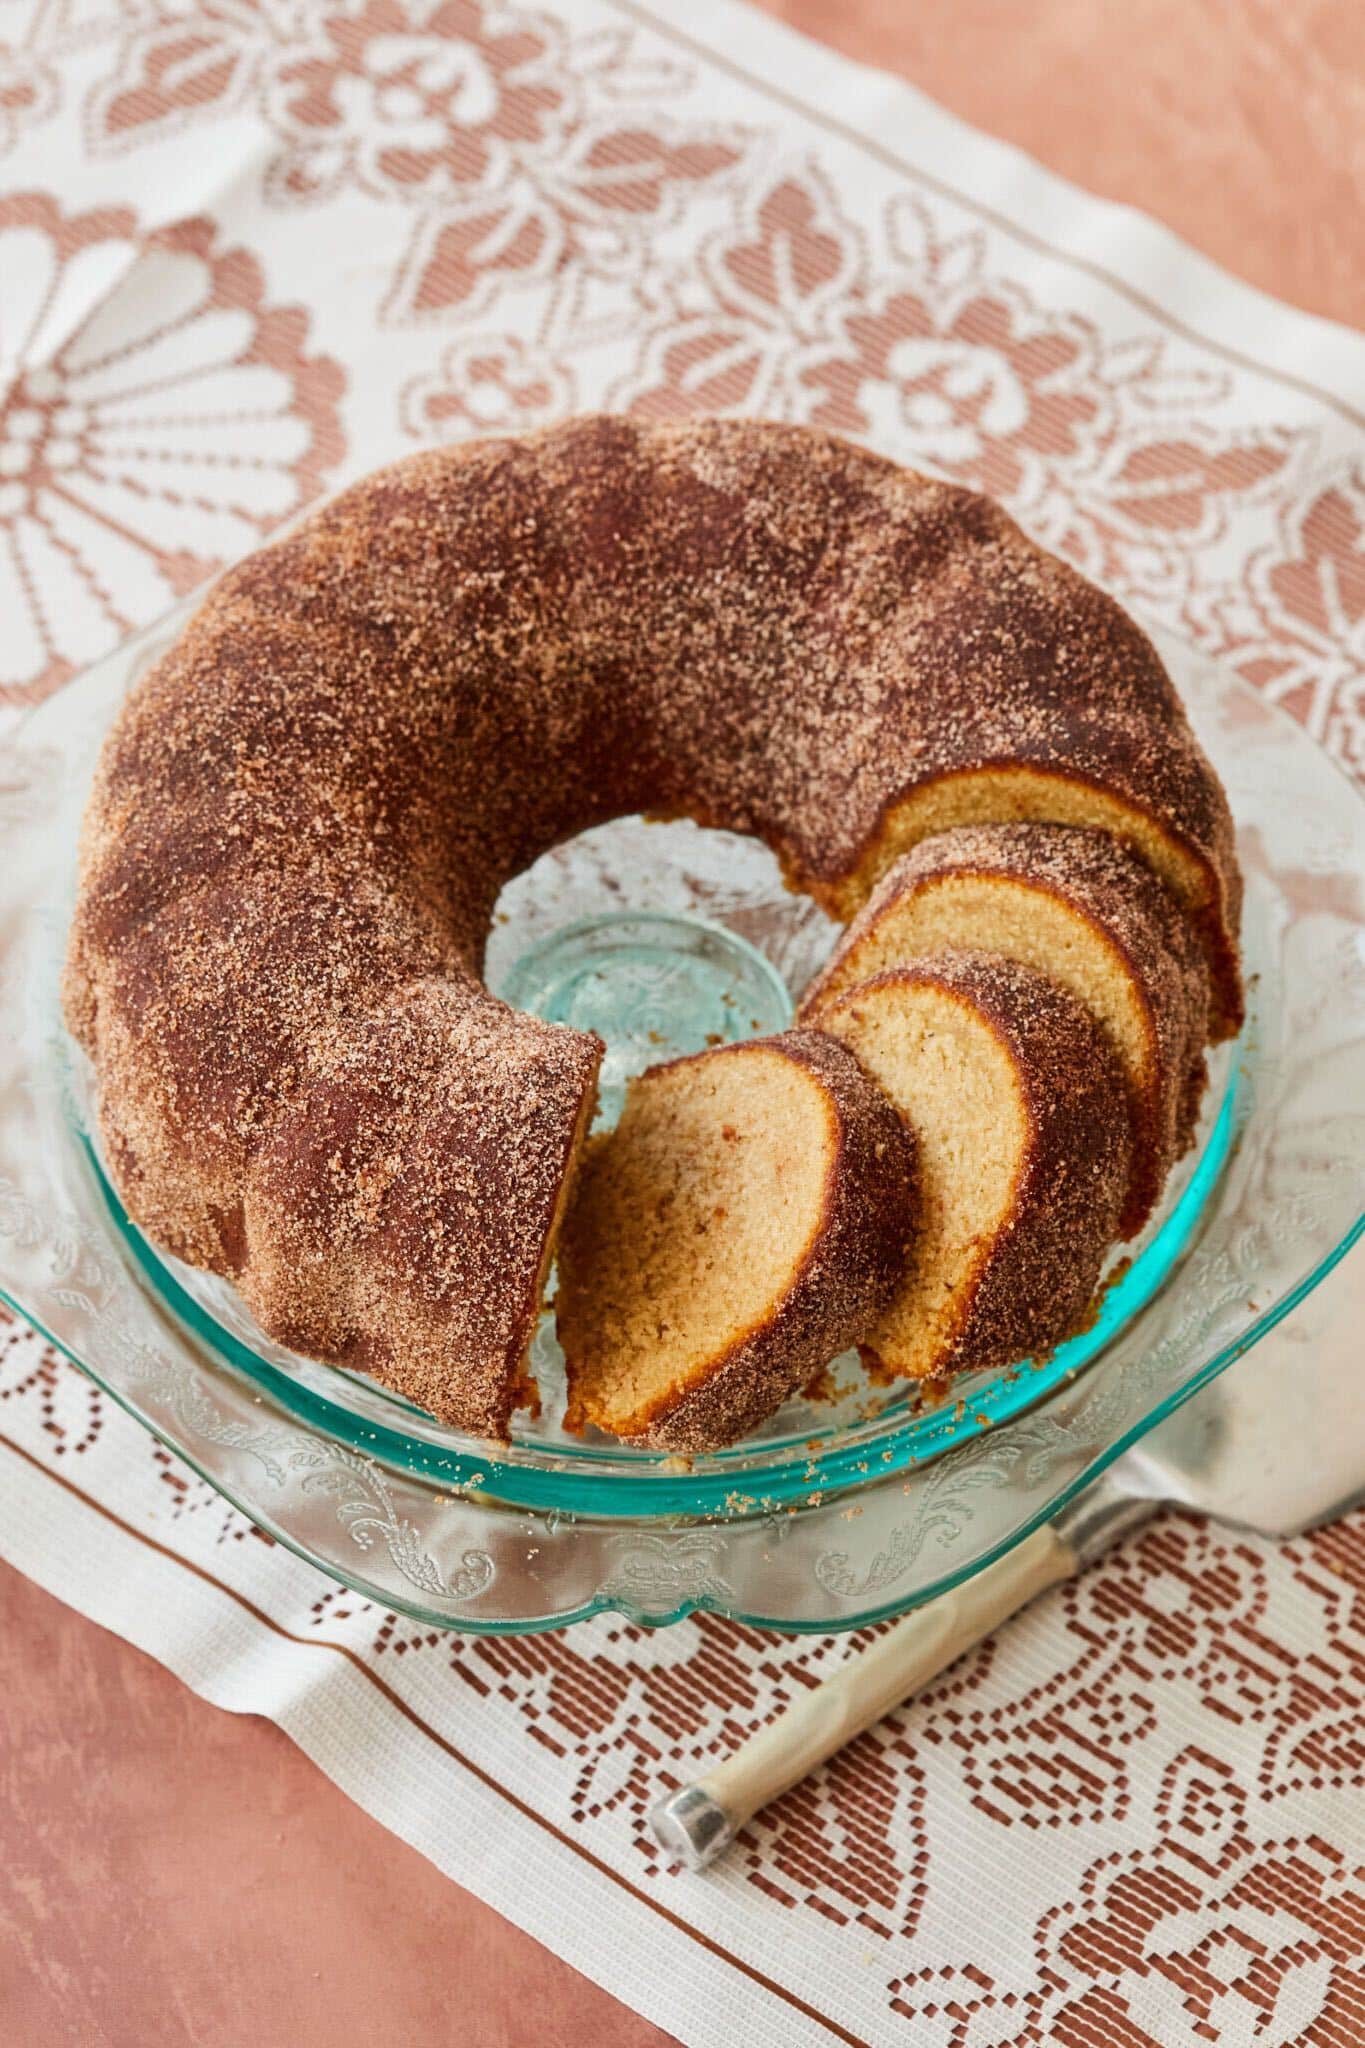 Apple Cider Donut Cake is served on a glass cake stand with a few slices cur ready for serving. The cake is shaped like a donut from the bundt cake pan and is dark golden brown on the outside with cinnamon sugar and is lightly yellow and moist on the inside. 